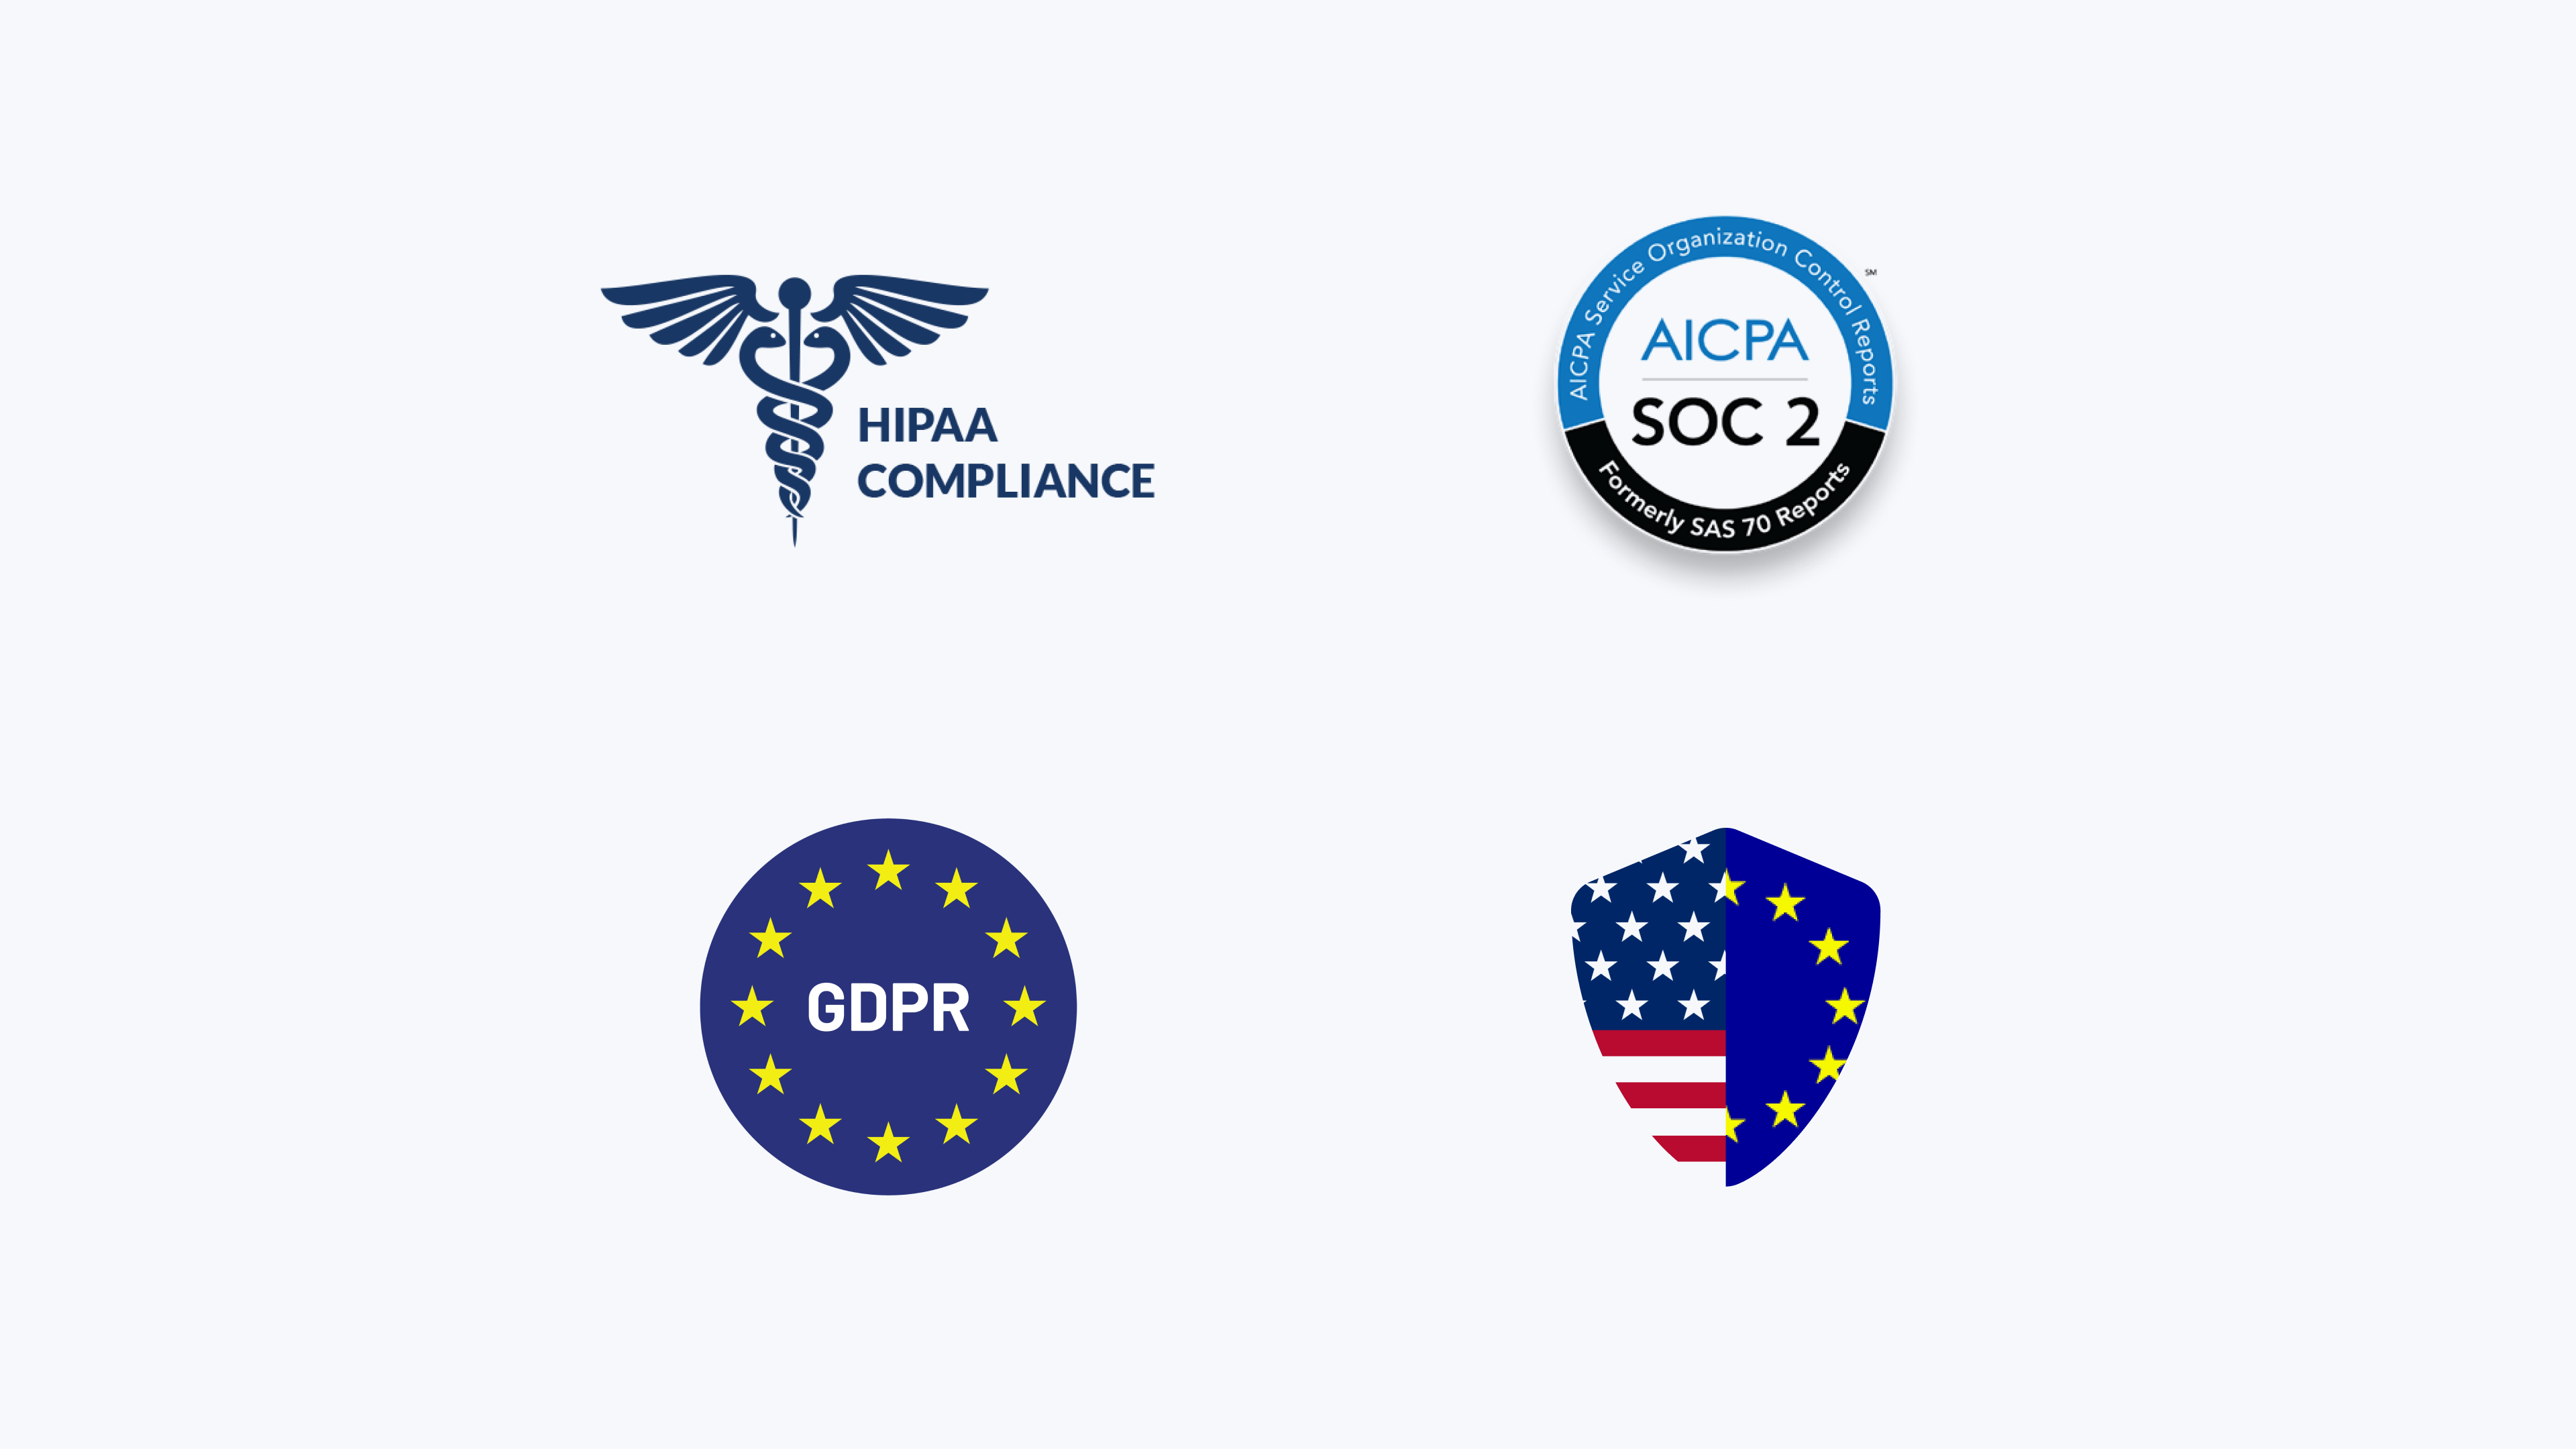 SOC-2 and HIPAA Security Certifications